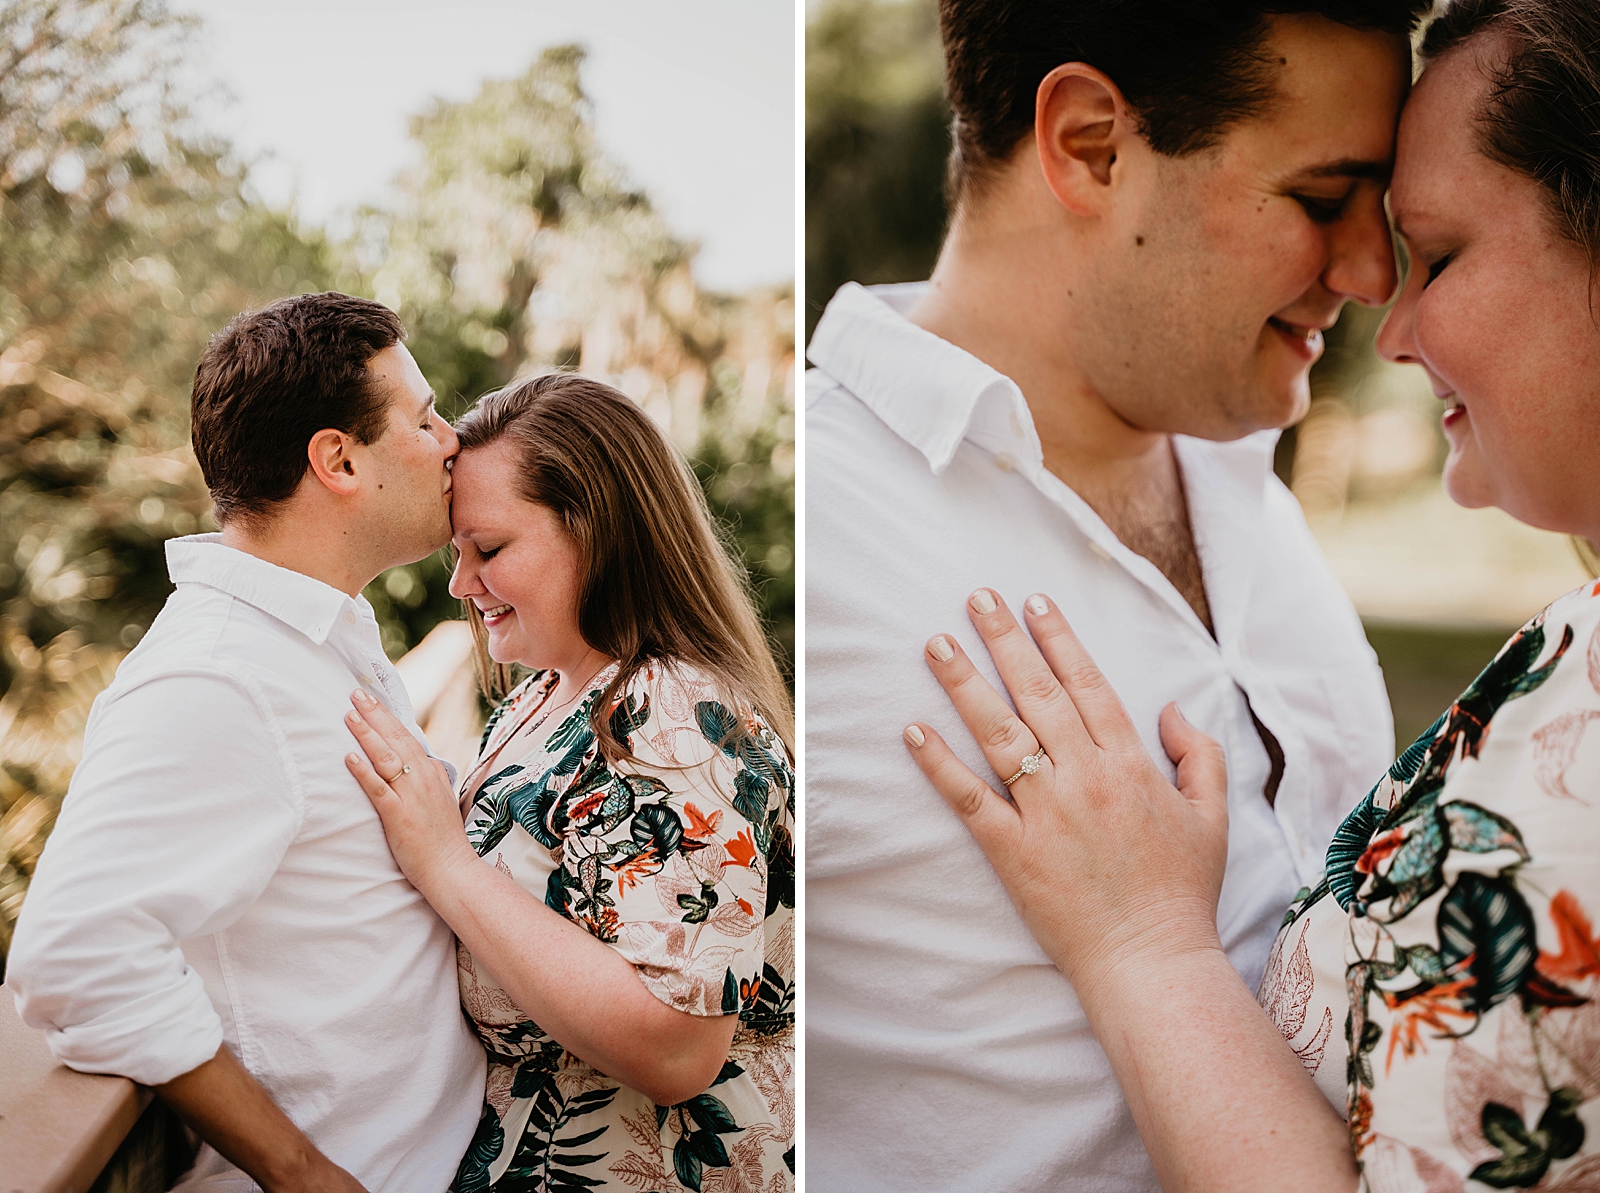 Man kisses lady's forehead as she puts hand on his chest showing off engagement ring Riverbend Park Engagement Photography captured by South Florida Engagement Photographer Krystal Capone Photography 